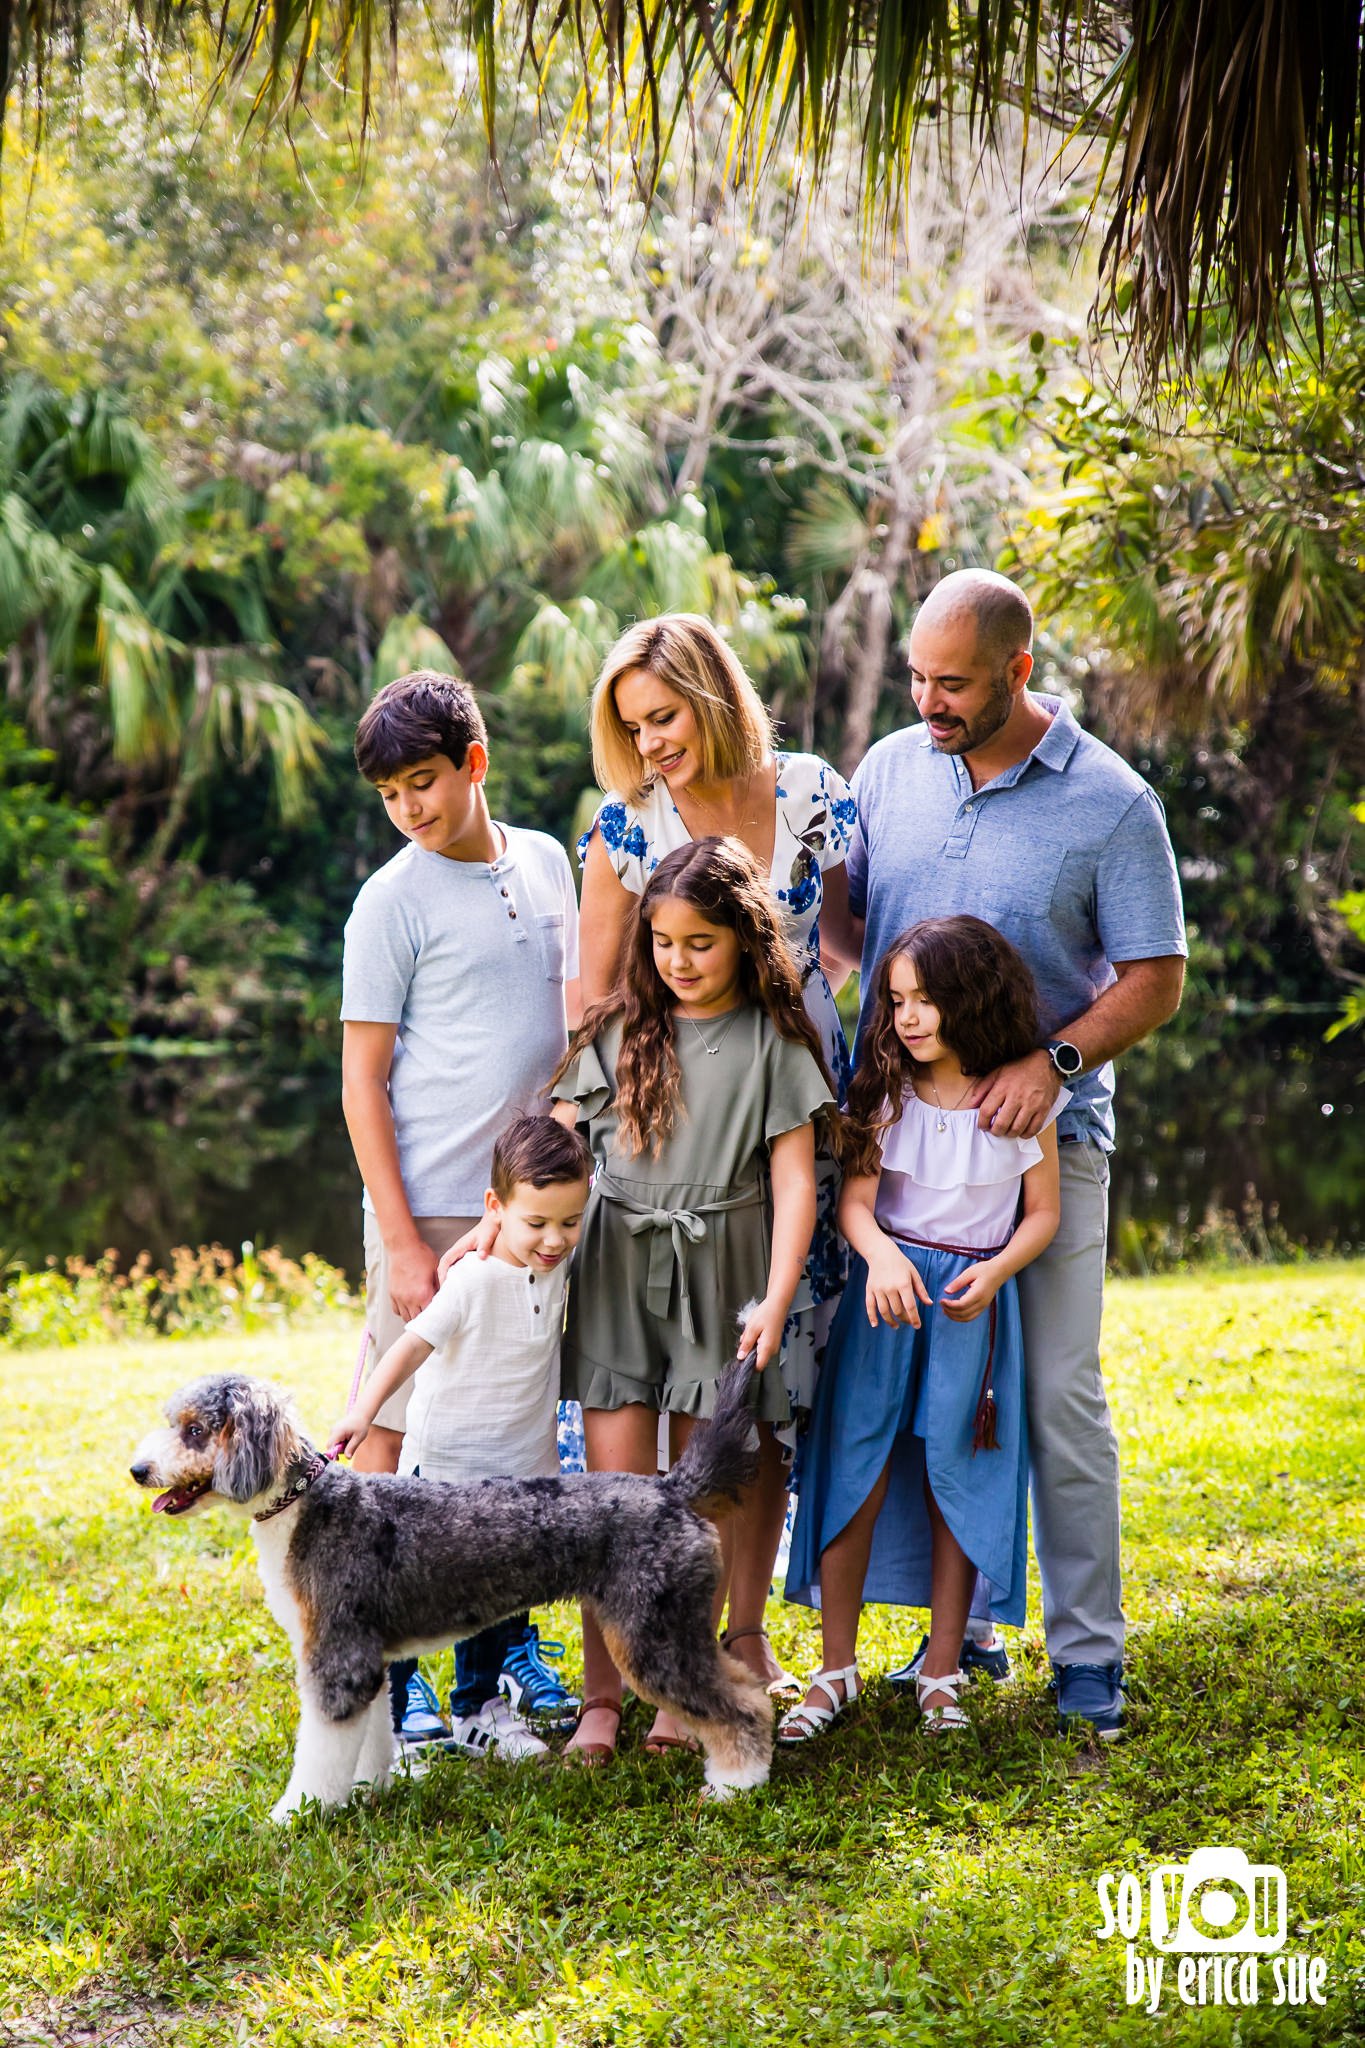 16-lifestyle-family-photographer-riverbend-park-jupiter-fl-so-you-by-erica-sue-ES1_8602.JPG